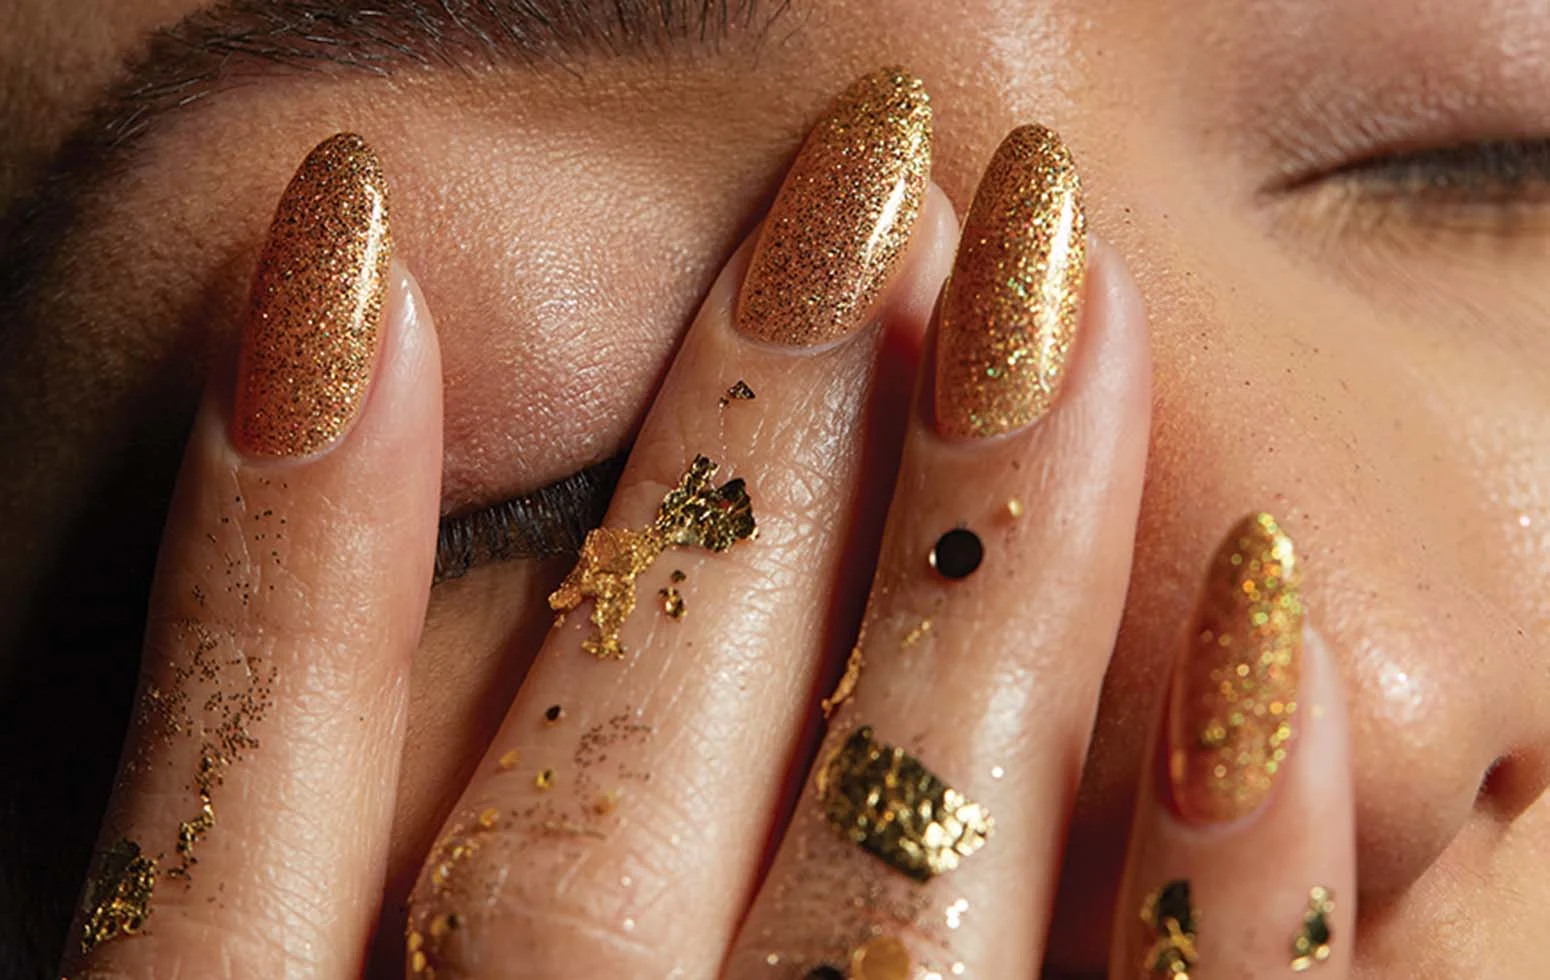 Introducing #OPIHiDefGlitters: The Glitter Effect Your Nails Need - Blog